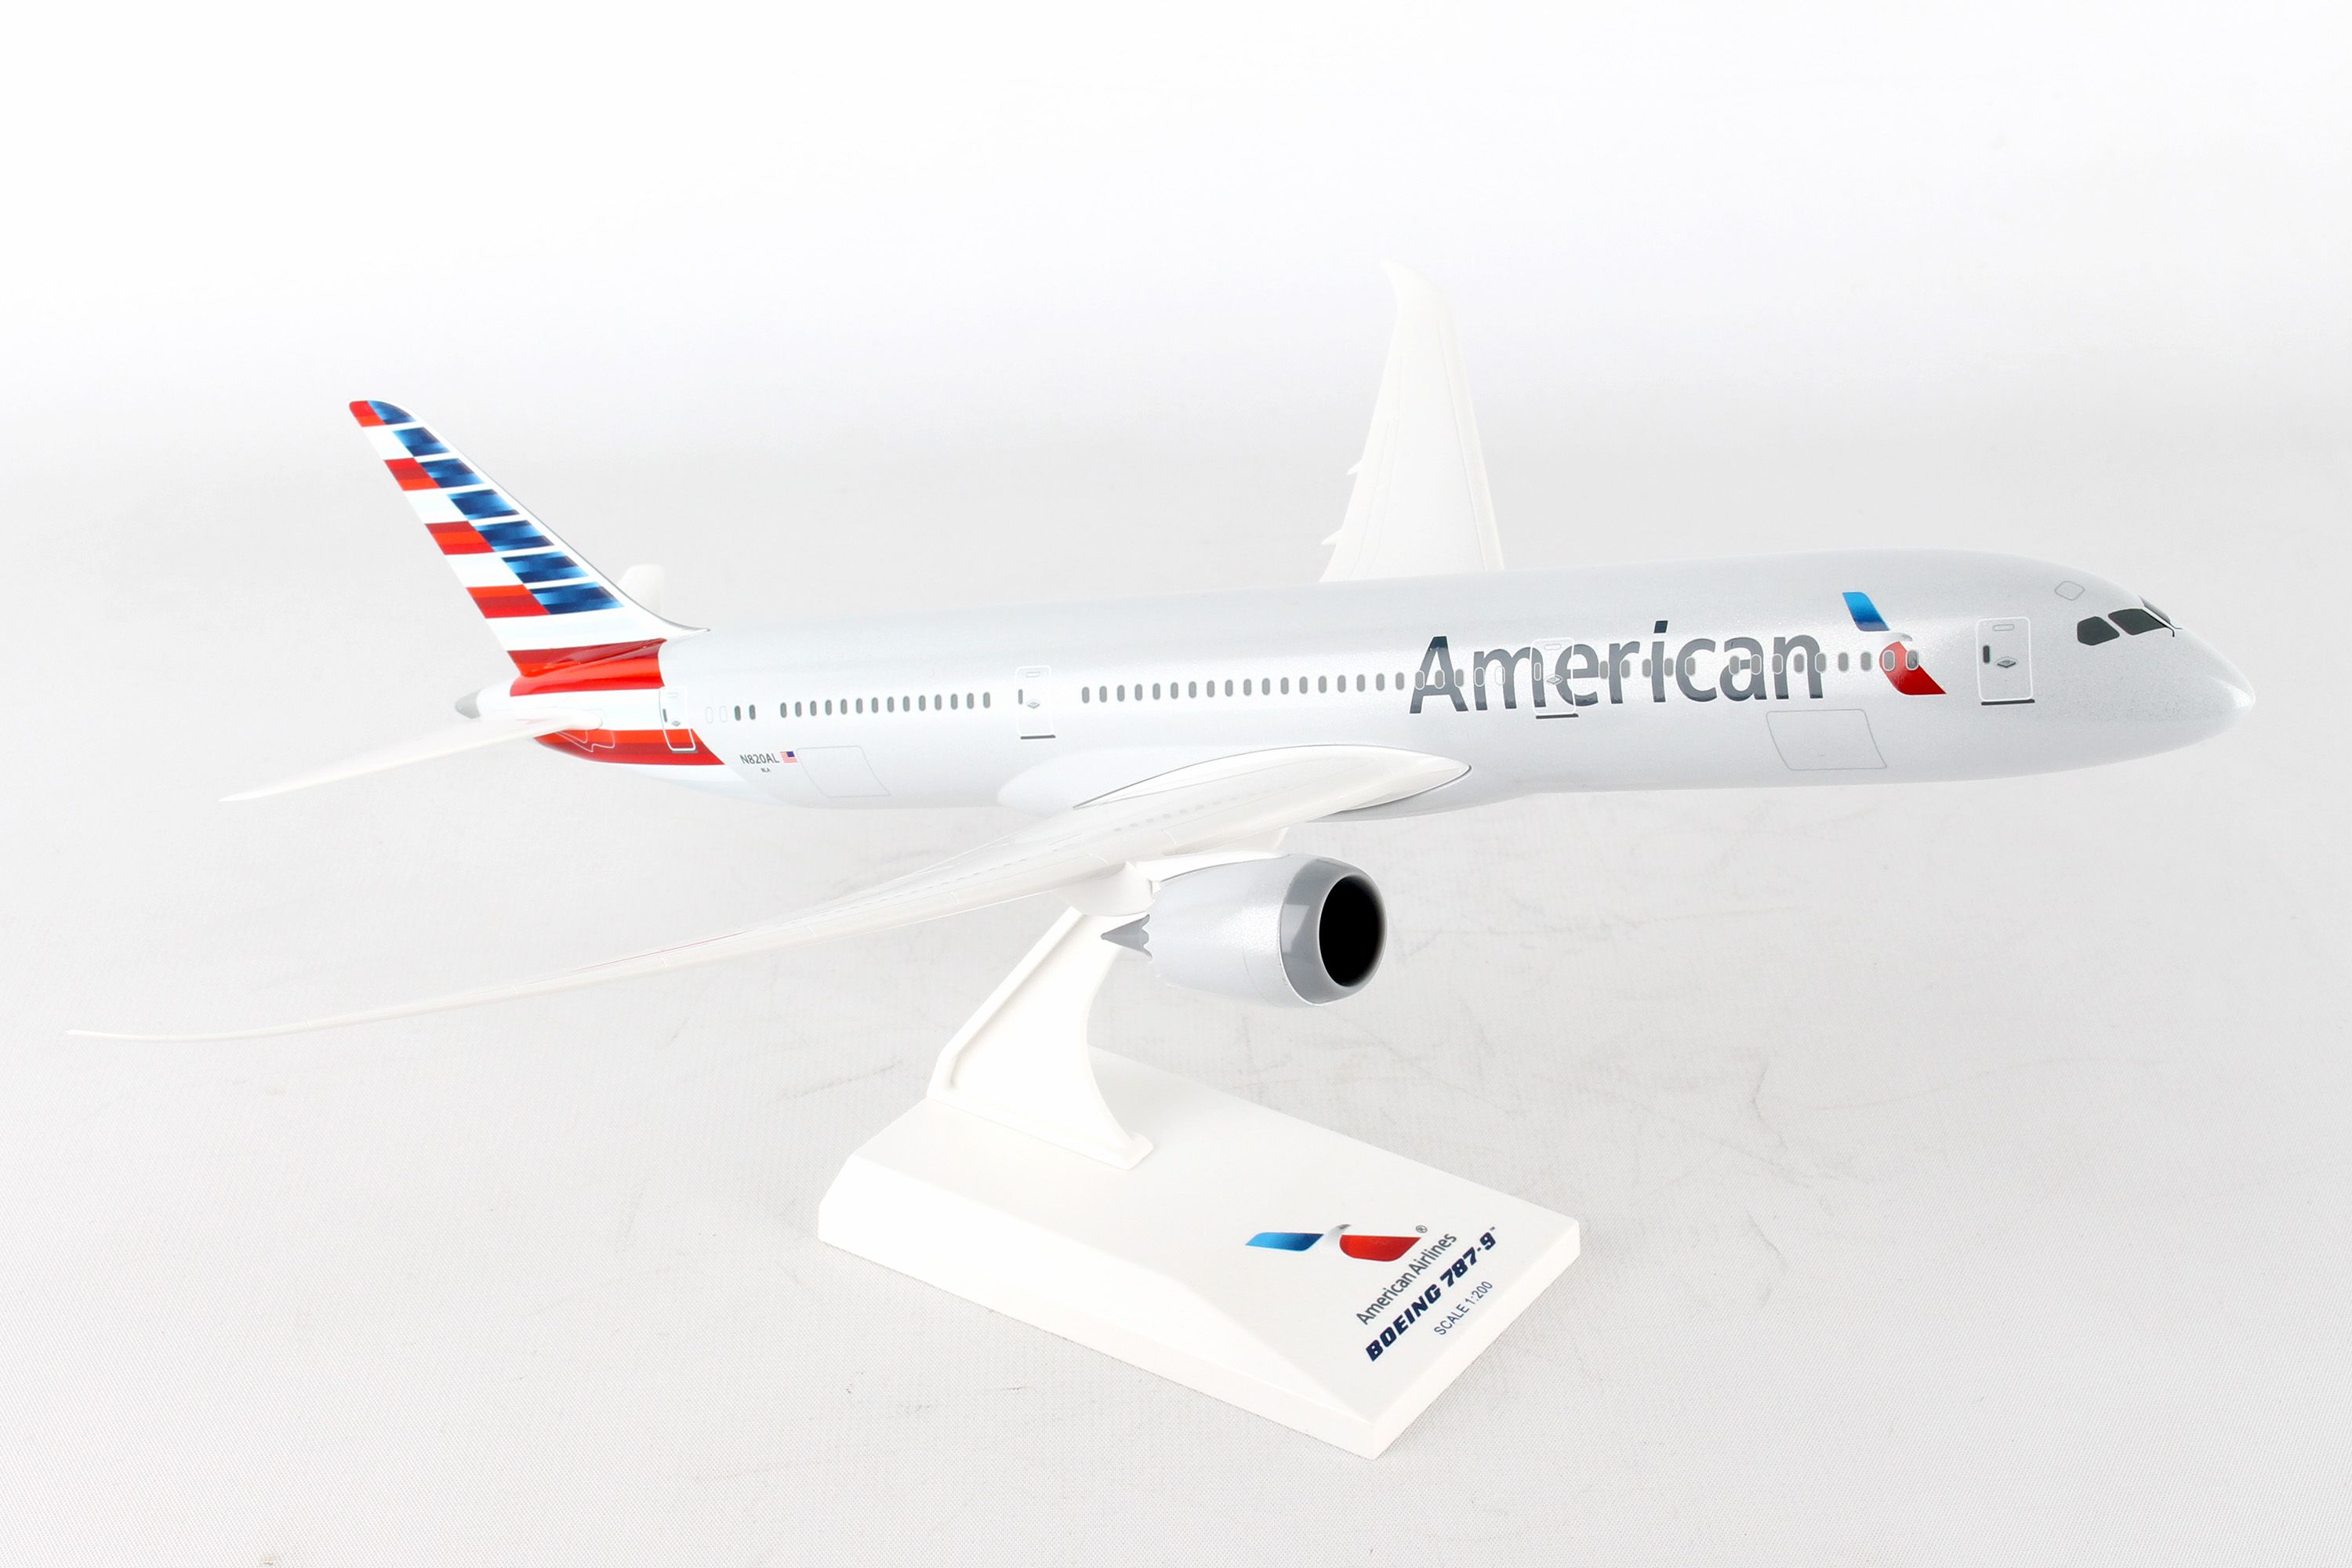 SkyMarks Flugzeugmodell American Airlines Boeing 787-9 Maßstab 1:200